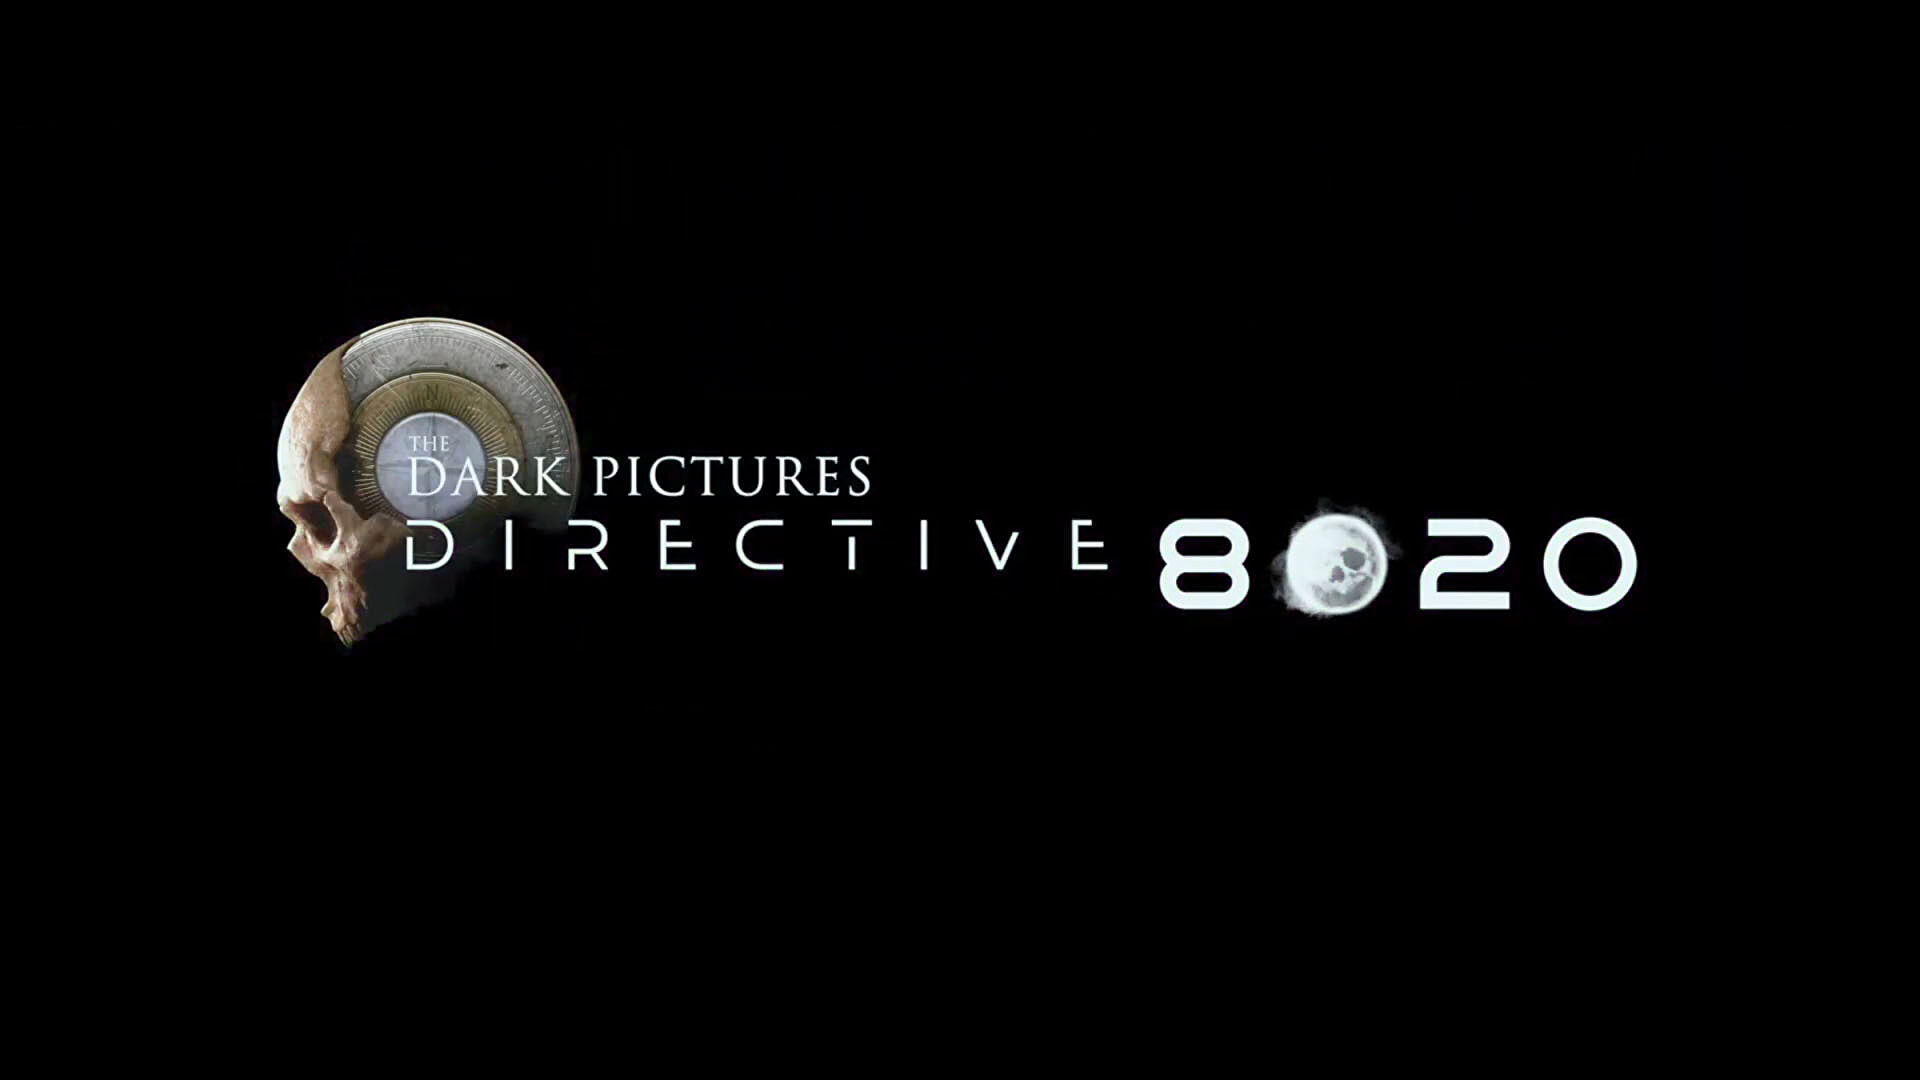 A teaser trailer for The Dark Pictures Anthology’s next game, Directive 8020, has leaked